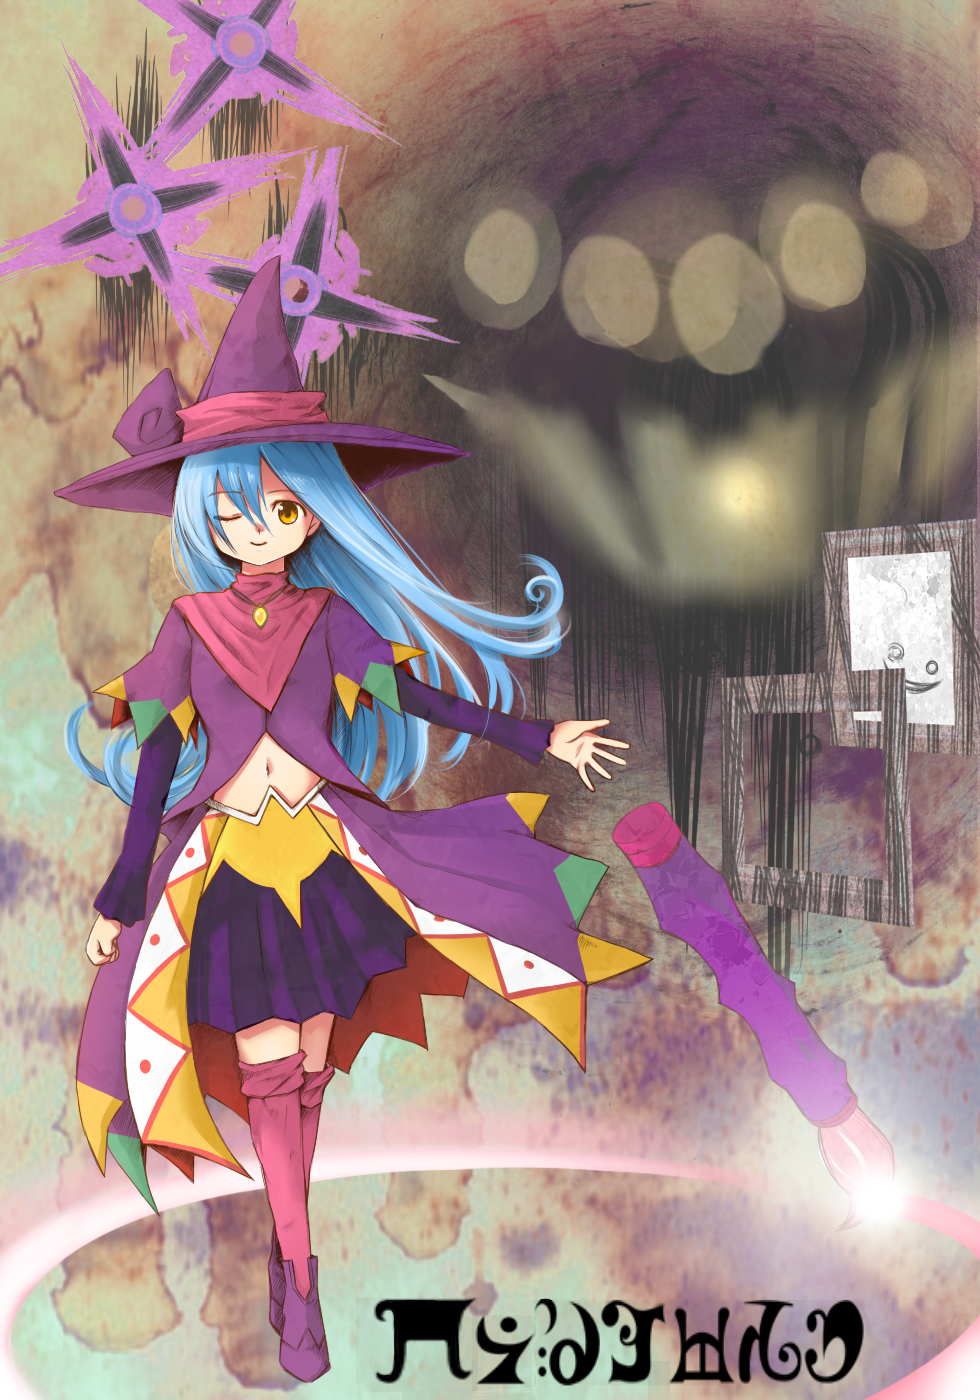 1girl ;) abstract_background blue_hair character_name commentary_request crossover drawcia eyebrows_visible_through_hair fouma full_body hat highres kirby_(series) long_hair long_sleeves madoka_runes magic_circle mahou_shoujo_madoka_magica midriff navel one_eye_closed outstretched_arm paintbrush painting_(object) parody personification pink_legwear purple_footwear purple_skirt robe skirt smile style_parody trait_connection translated witch witch_(madoka_magica) witch_hat yellow_eyes